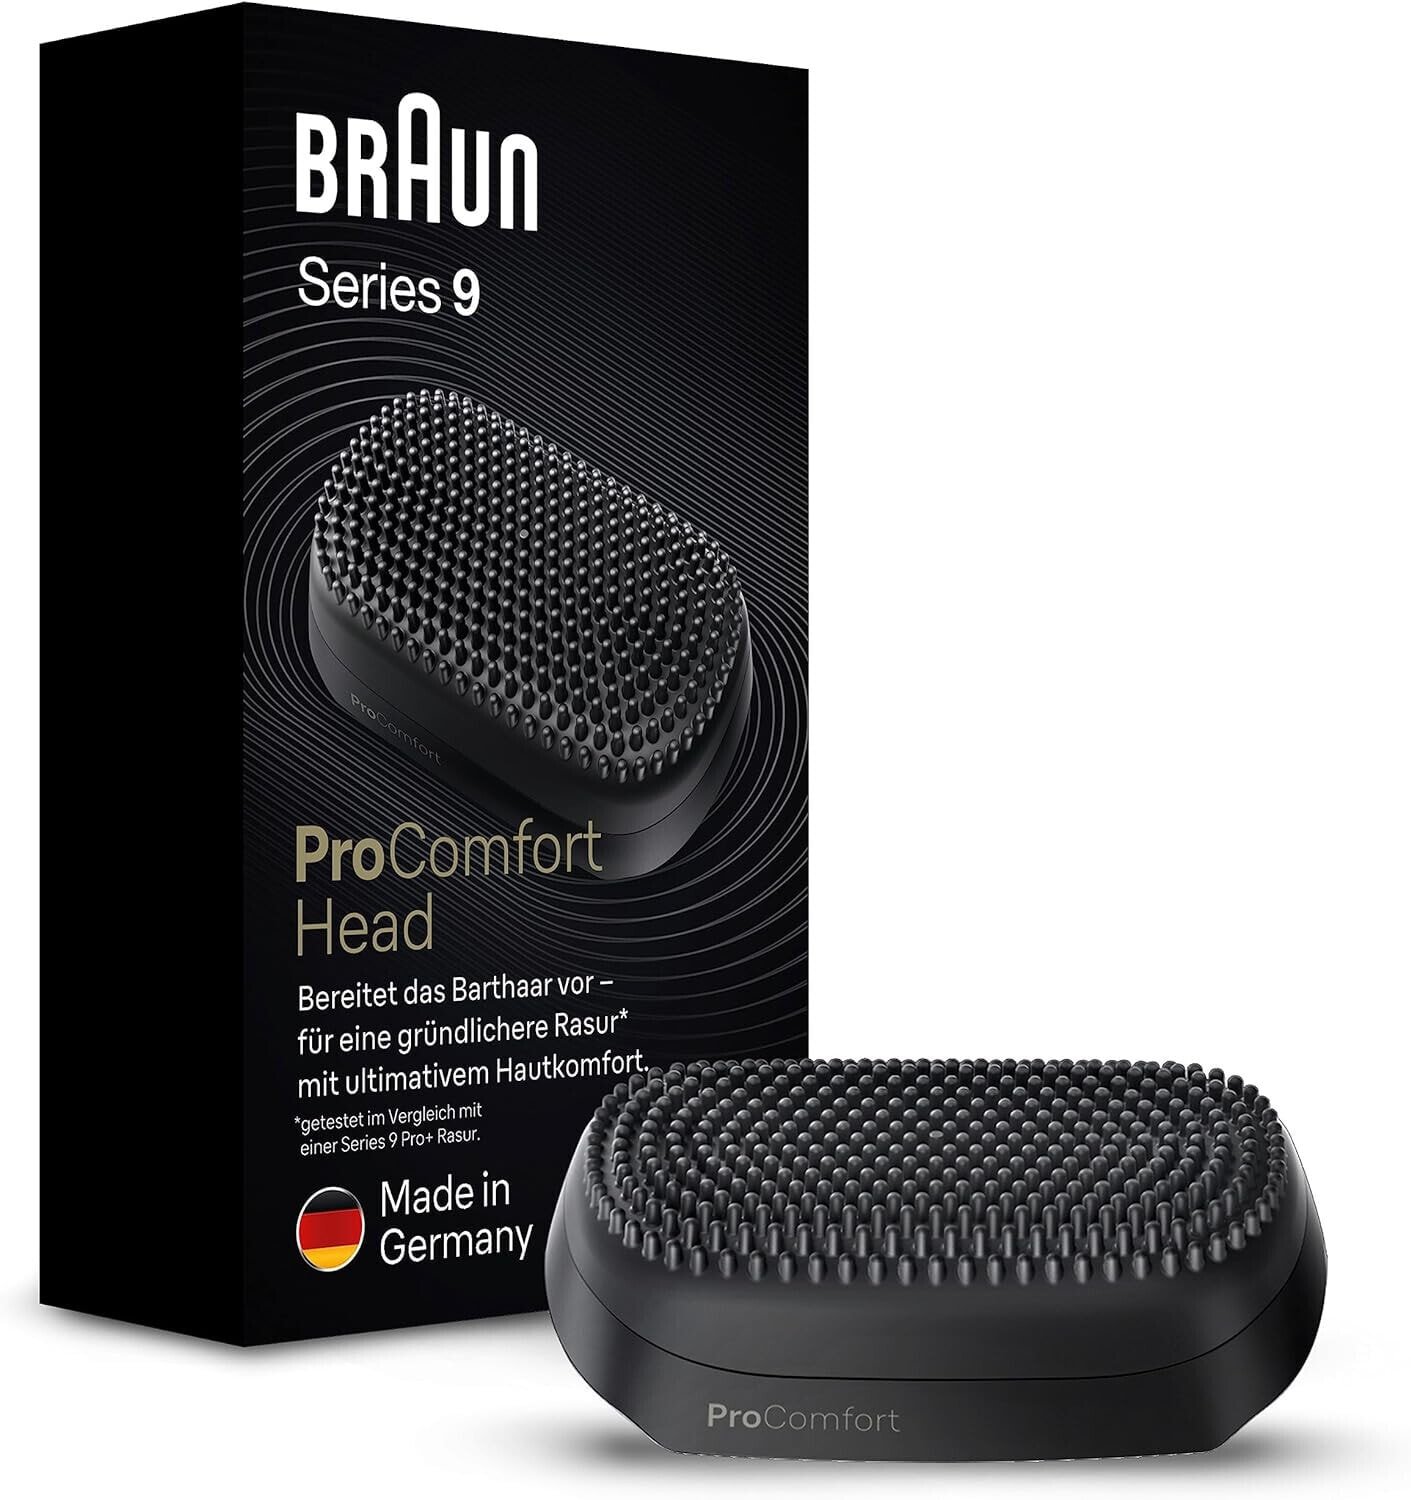 Braun Series 9 ProComfort Shaving Head, Electric Shaver, Replacement Shaver Part Compatible with Men's Series 9, 9 Pro and 9 Pro+, 94 PS, Pack of 1